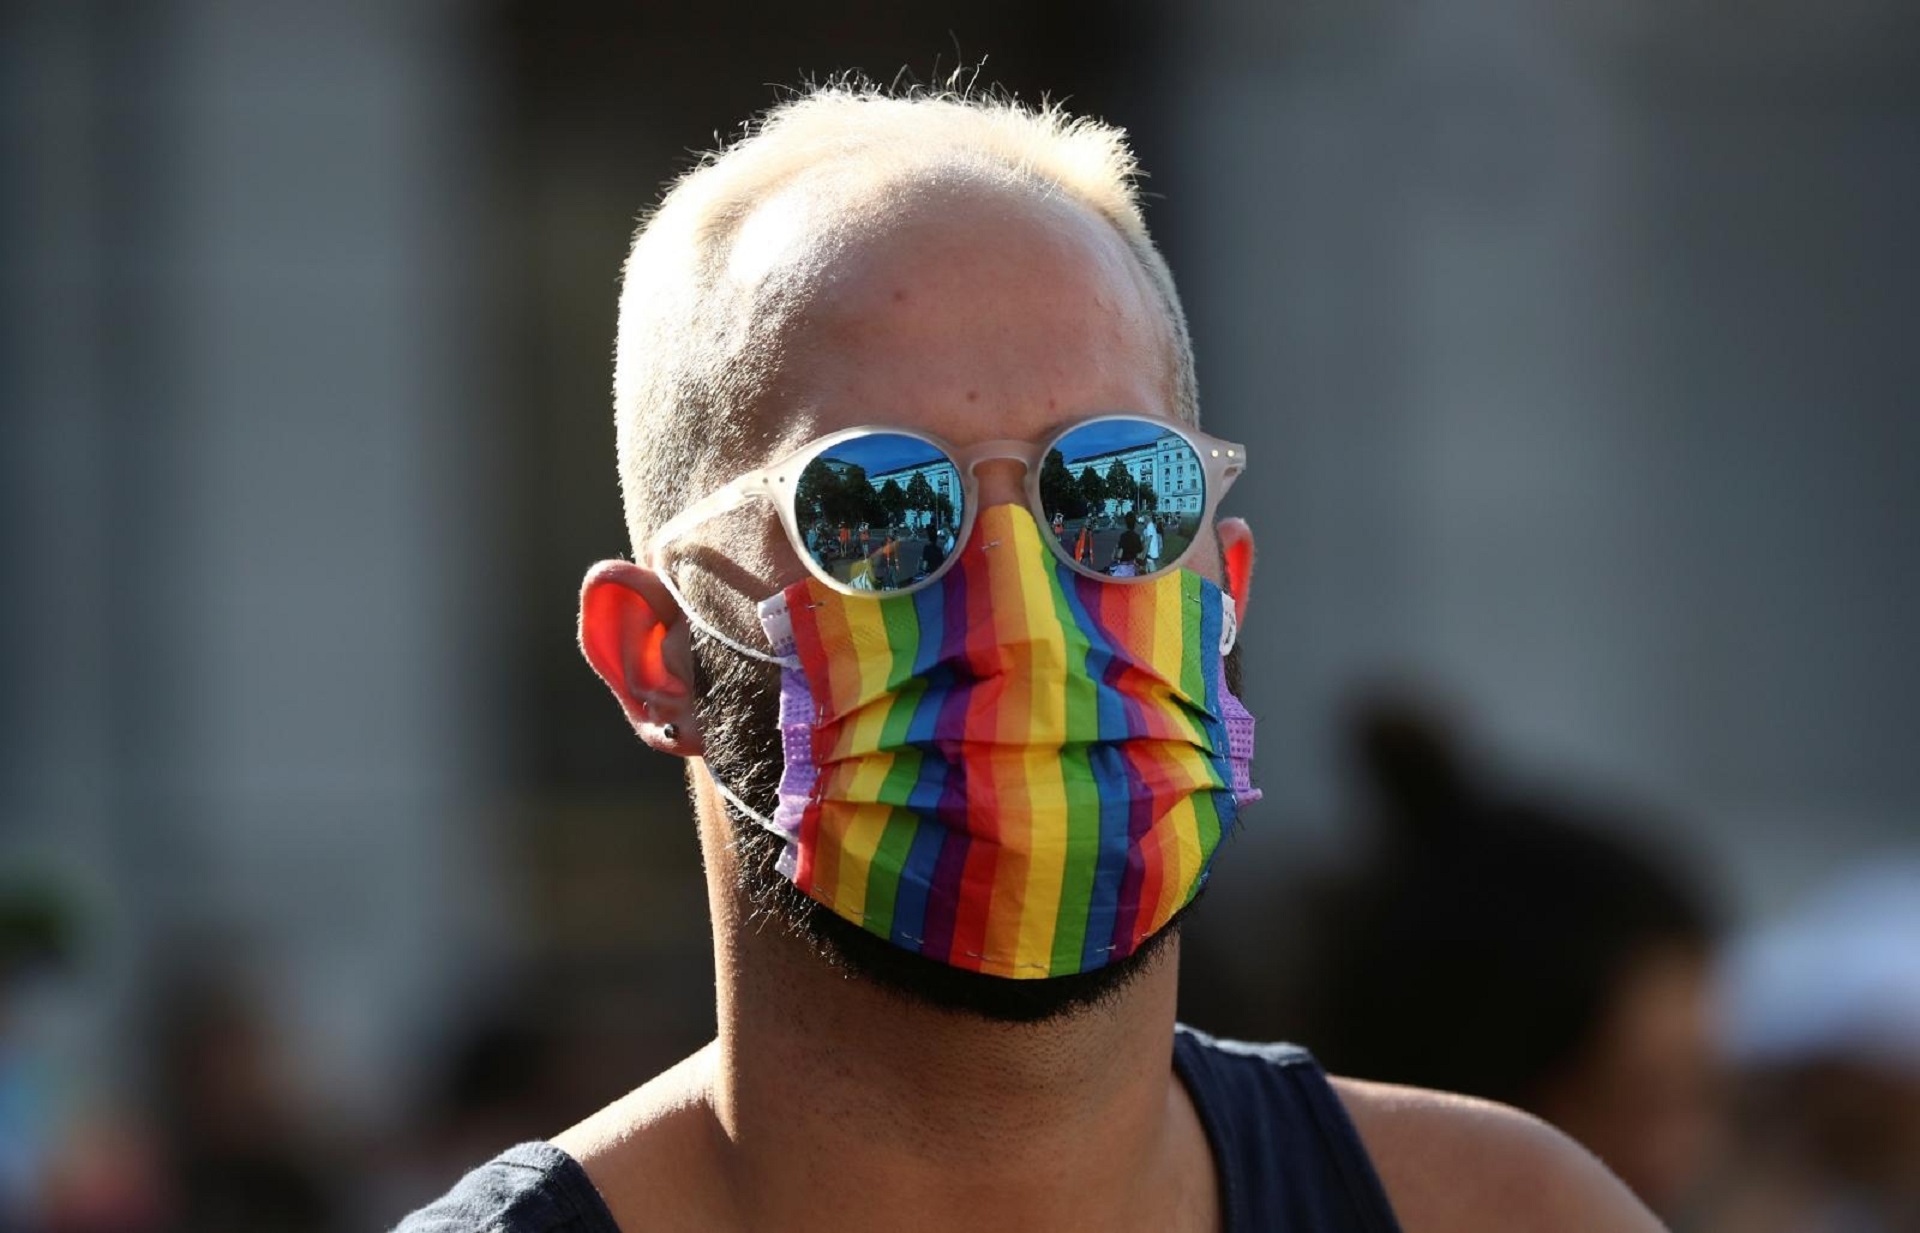 Participants attend the "Pride Ride 2020" ahead of parliamentary elections A participant wearing a rainbow flag mask attends the "Pride Ride 2020" ahead of parliamentary elections, amid the spread of the coronavirus disease (COVID-19), in Zagreb, Croatia, July 4, 2020. REUTERS/Marko Djurica MARKO DJURICA